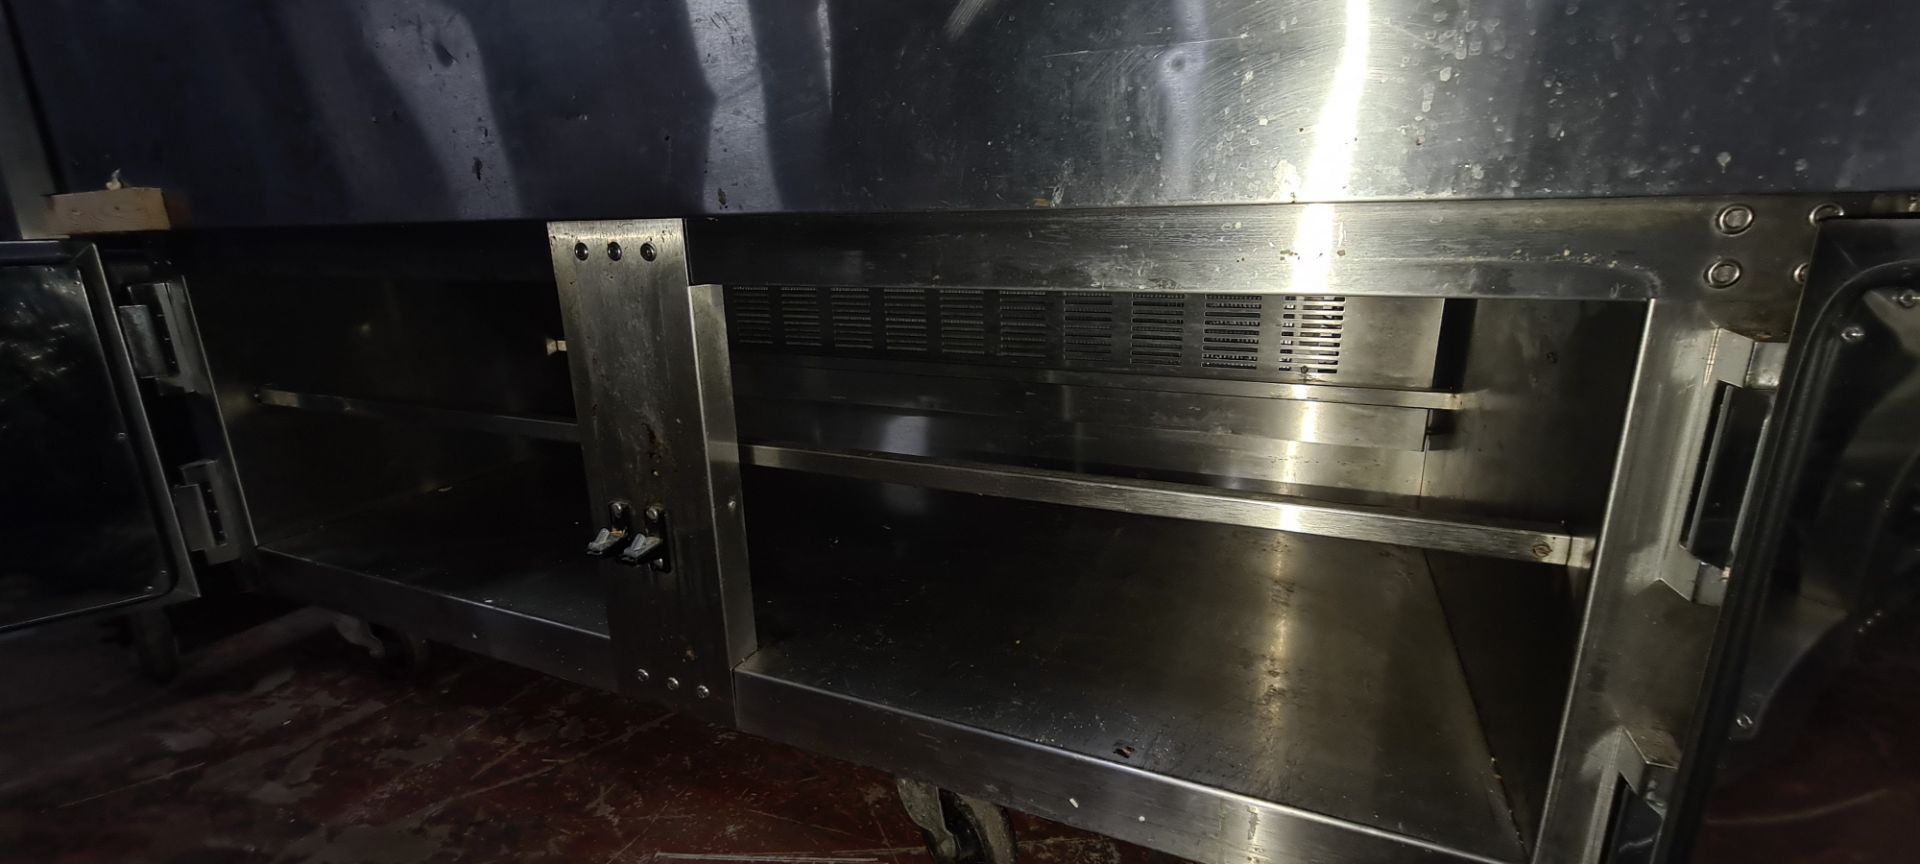 Stainless steel refrigerated cabinet - Image 6 of 7